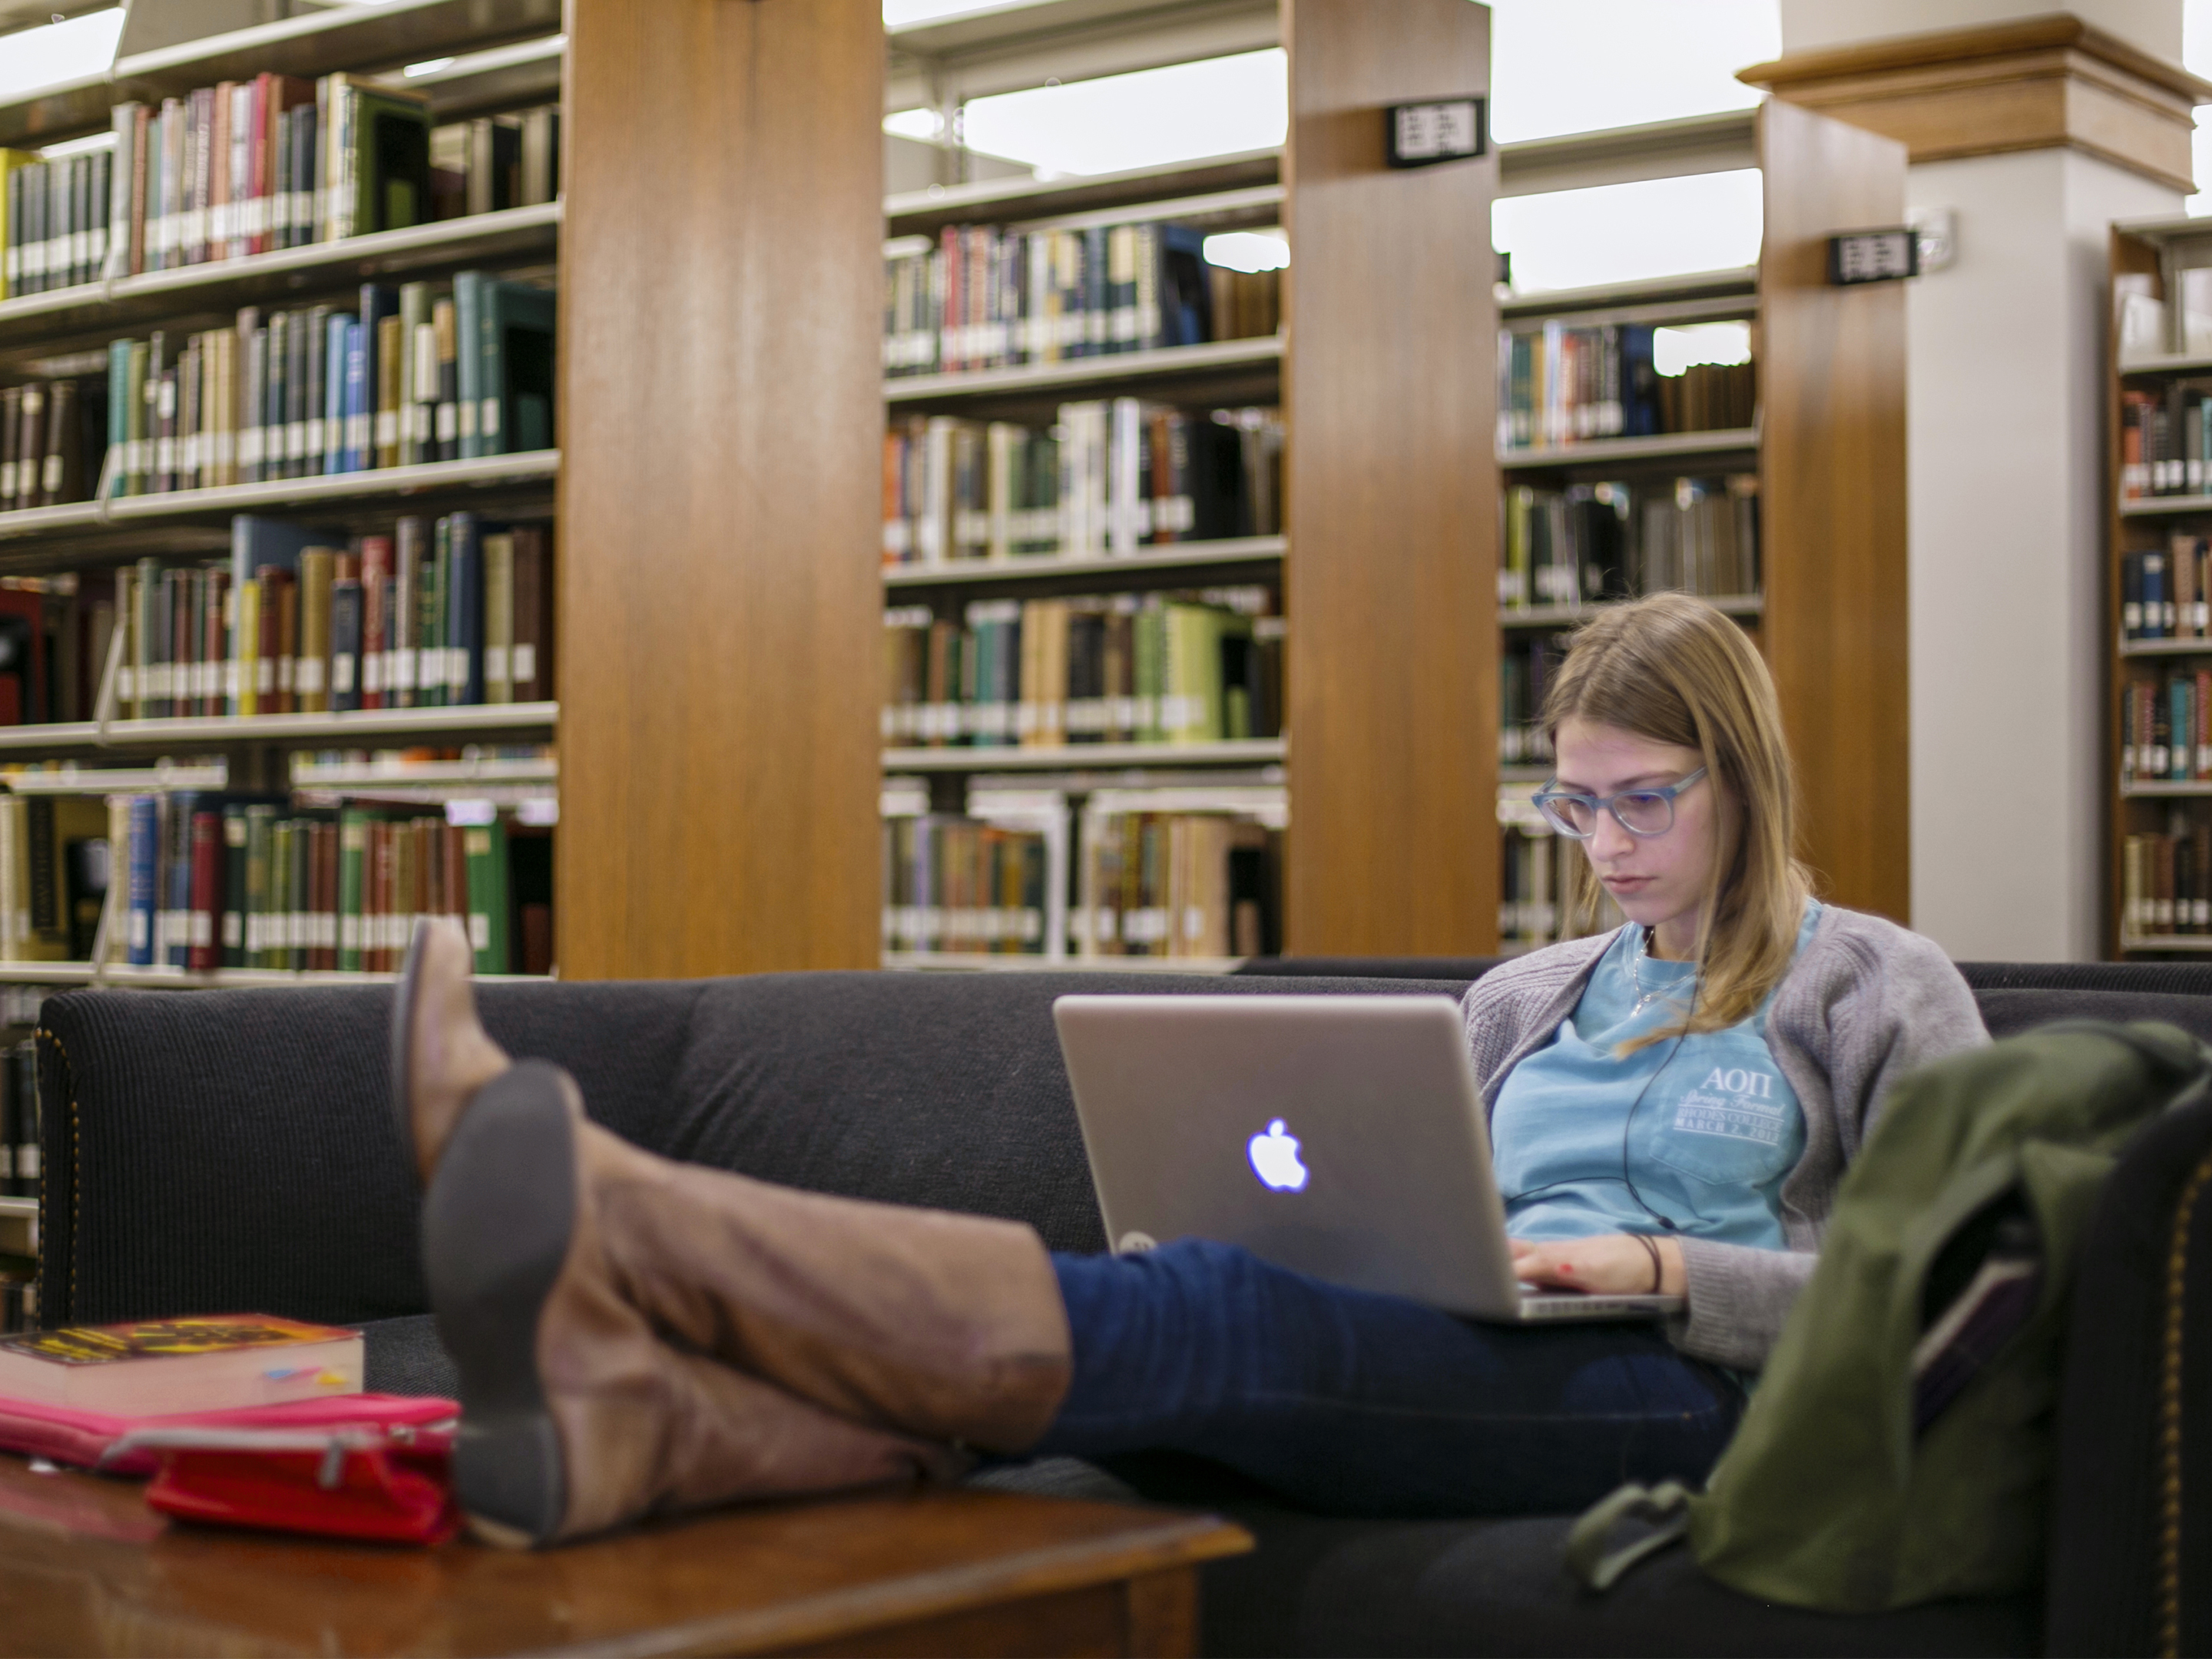 A female student sits with her feet propped up on the table in the library, staring at her laptop screen.